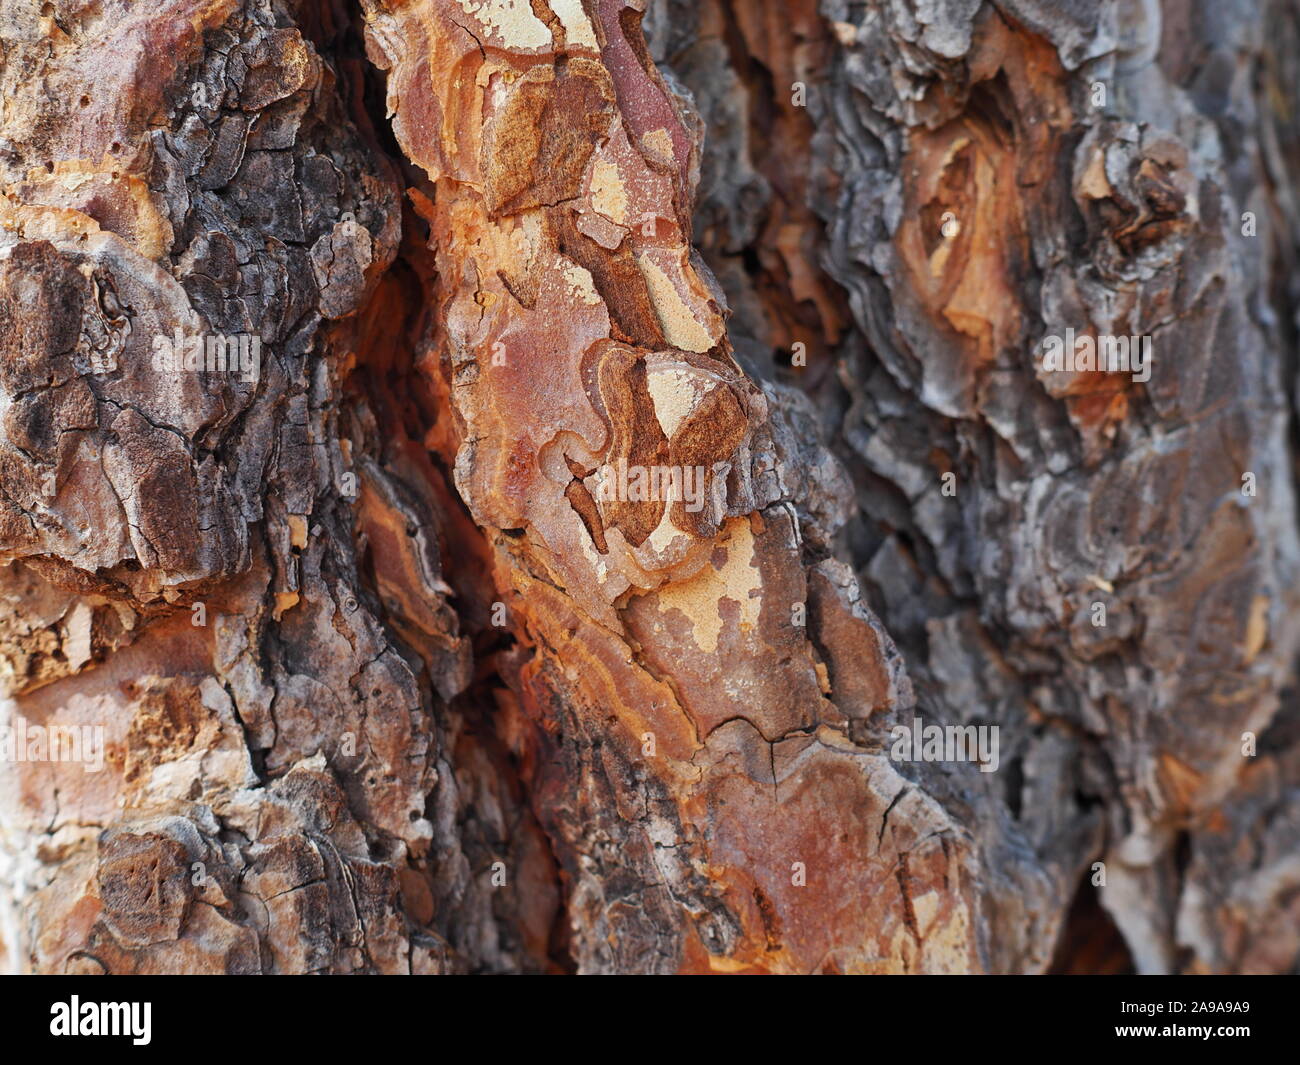 Ponderosa Pine Bark That Looks Like Puzzle Pieces, Brown And Gray  Photograph by Cavan Images - Pixels